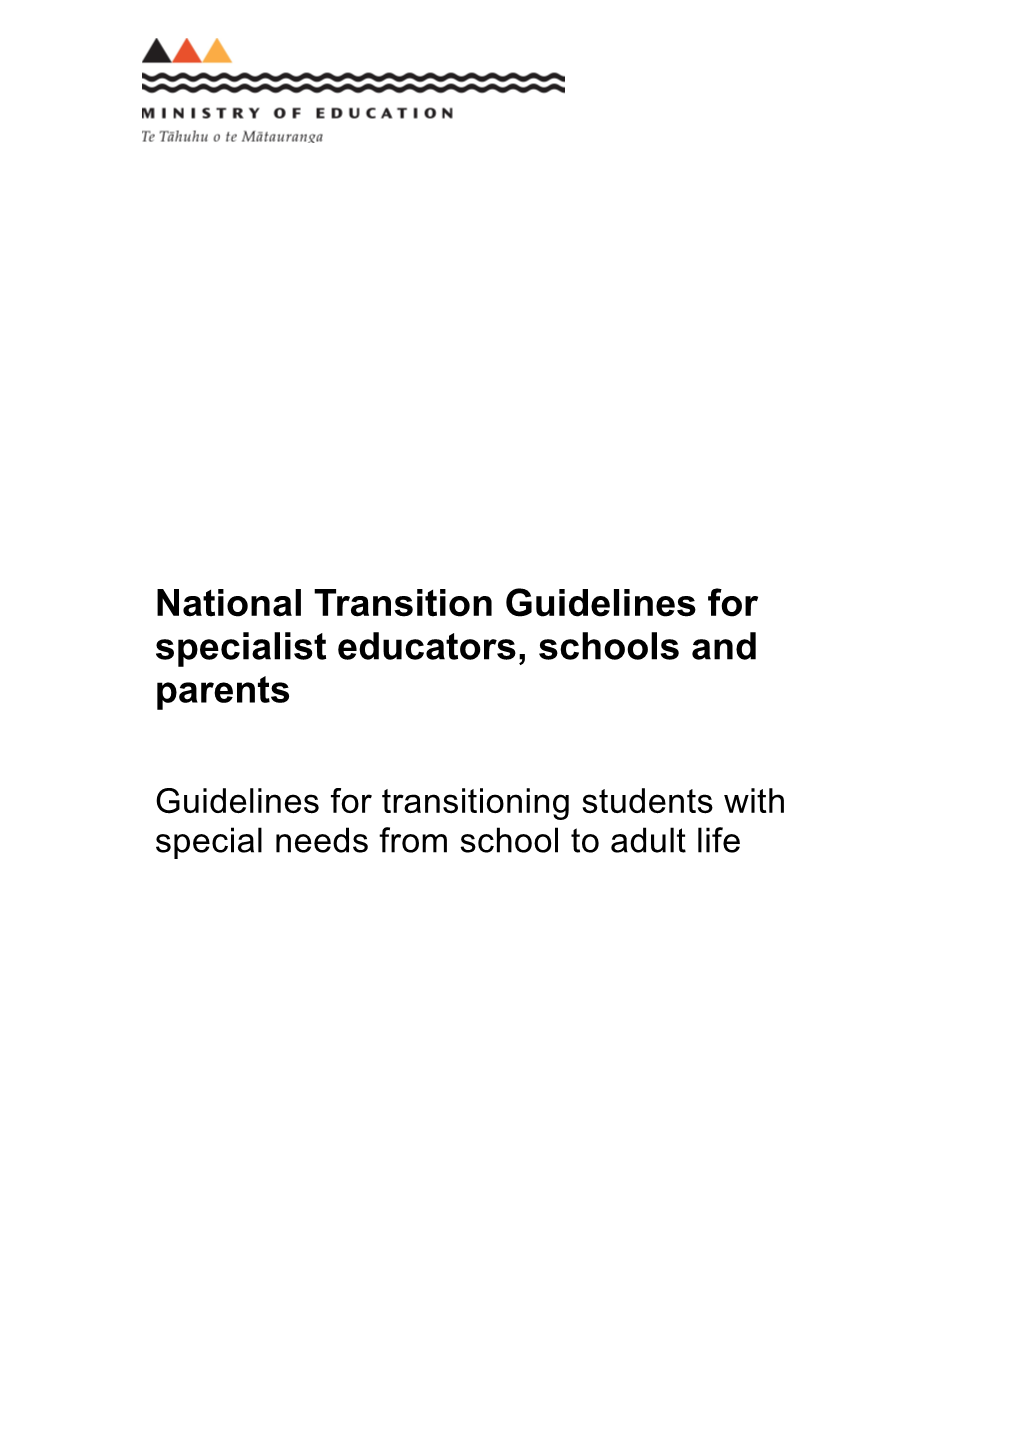 National Transition Guidelines for Specialist Educators, Schools and Parents